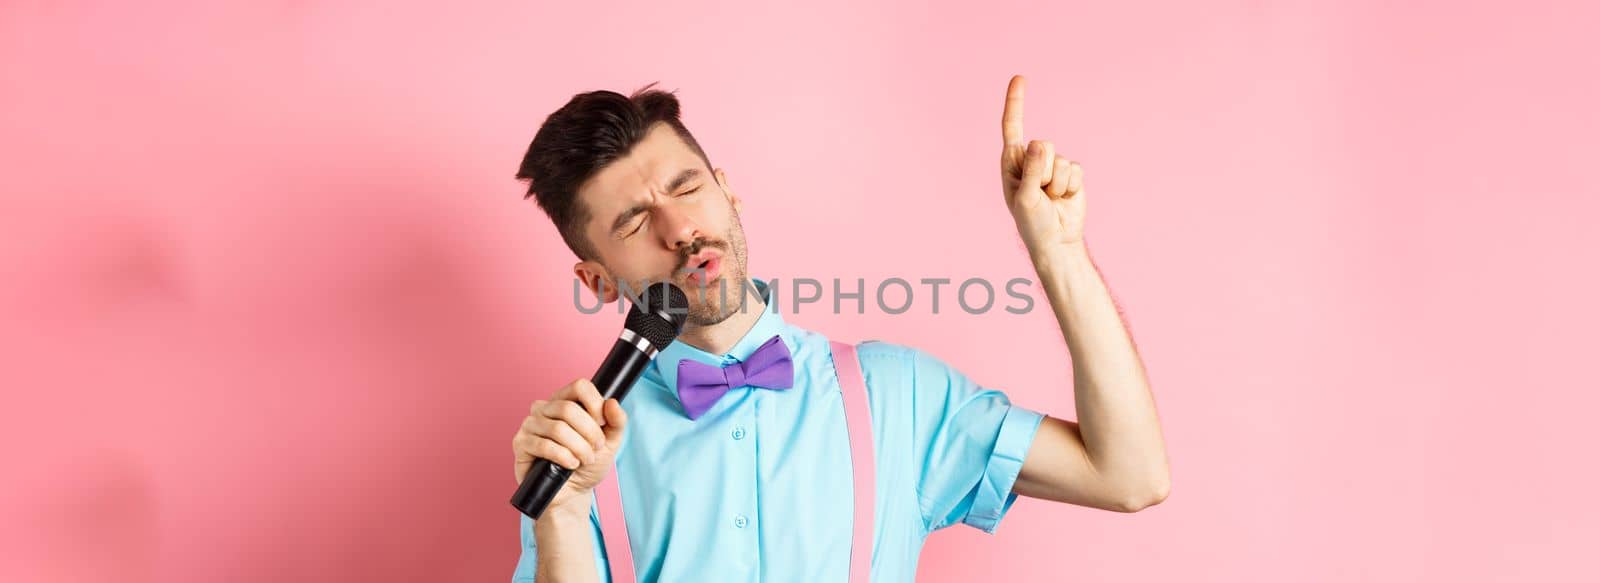 Party and festive events concept. Funny guy singing in microphone, raising finger up as reaching high note in song, standing on pink background.